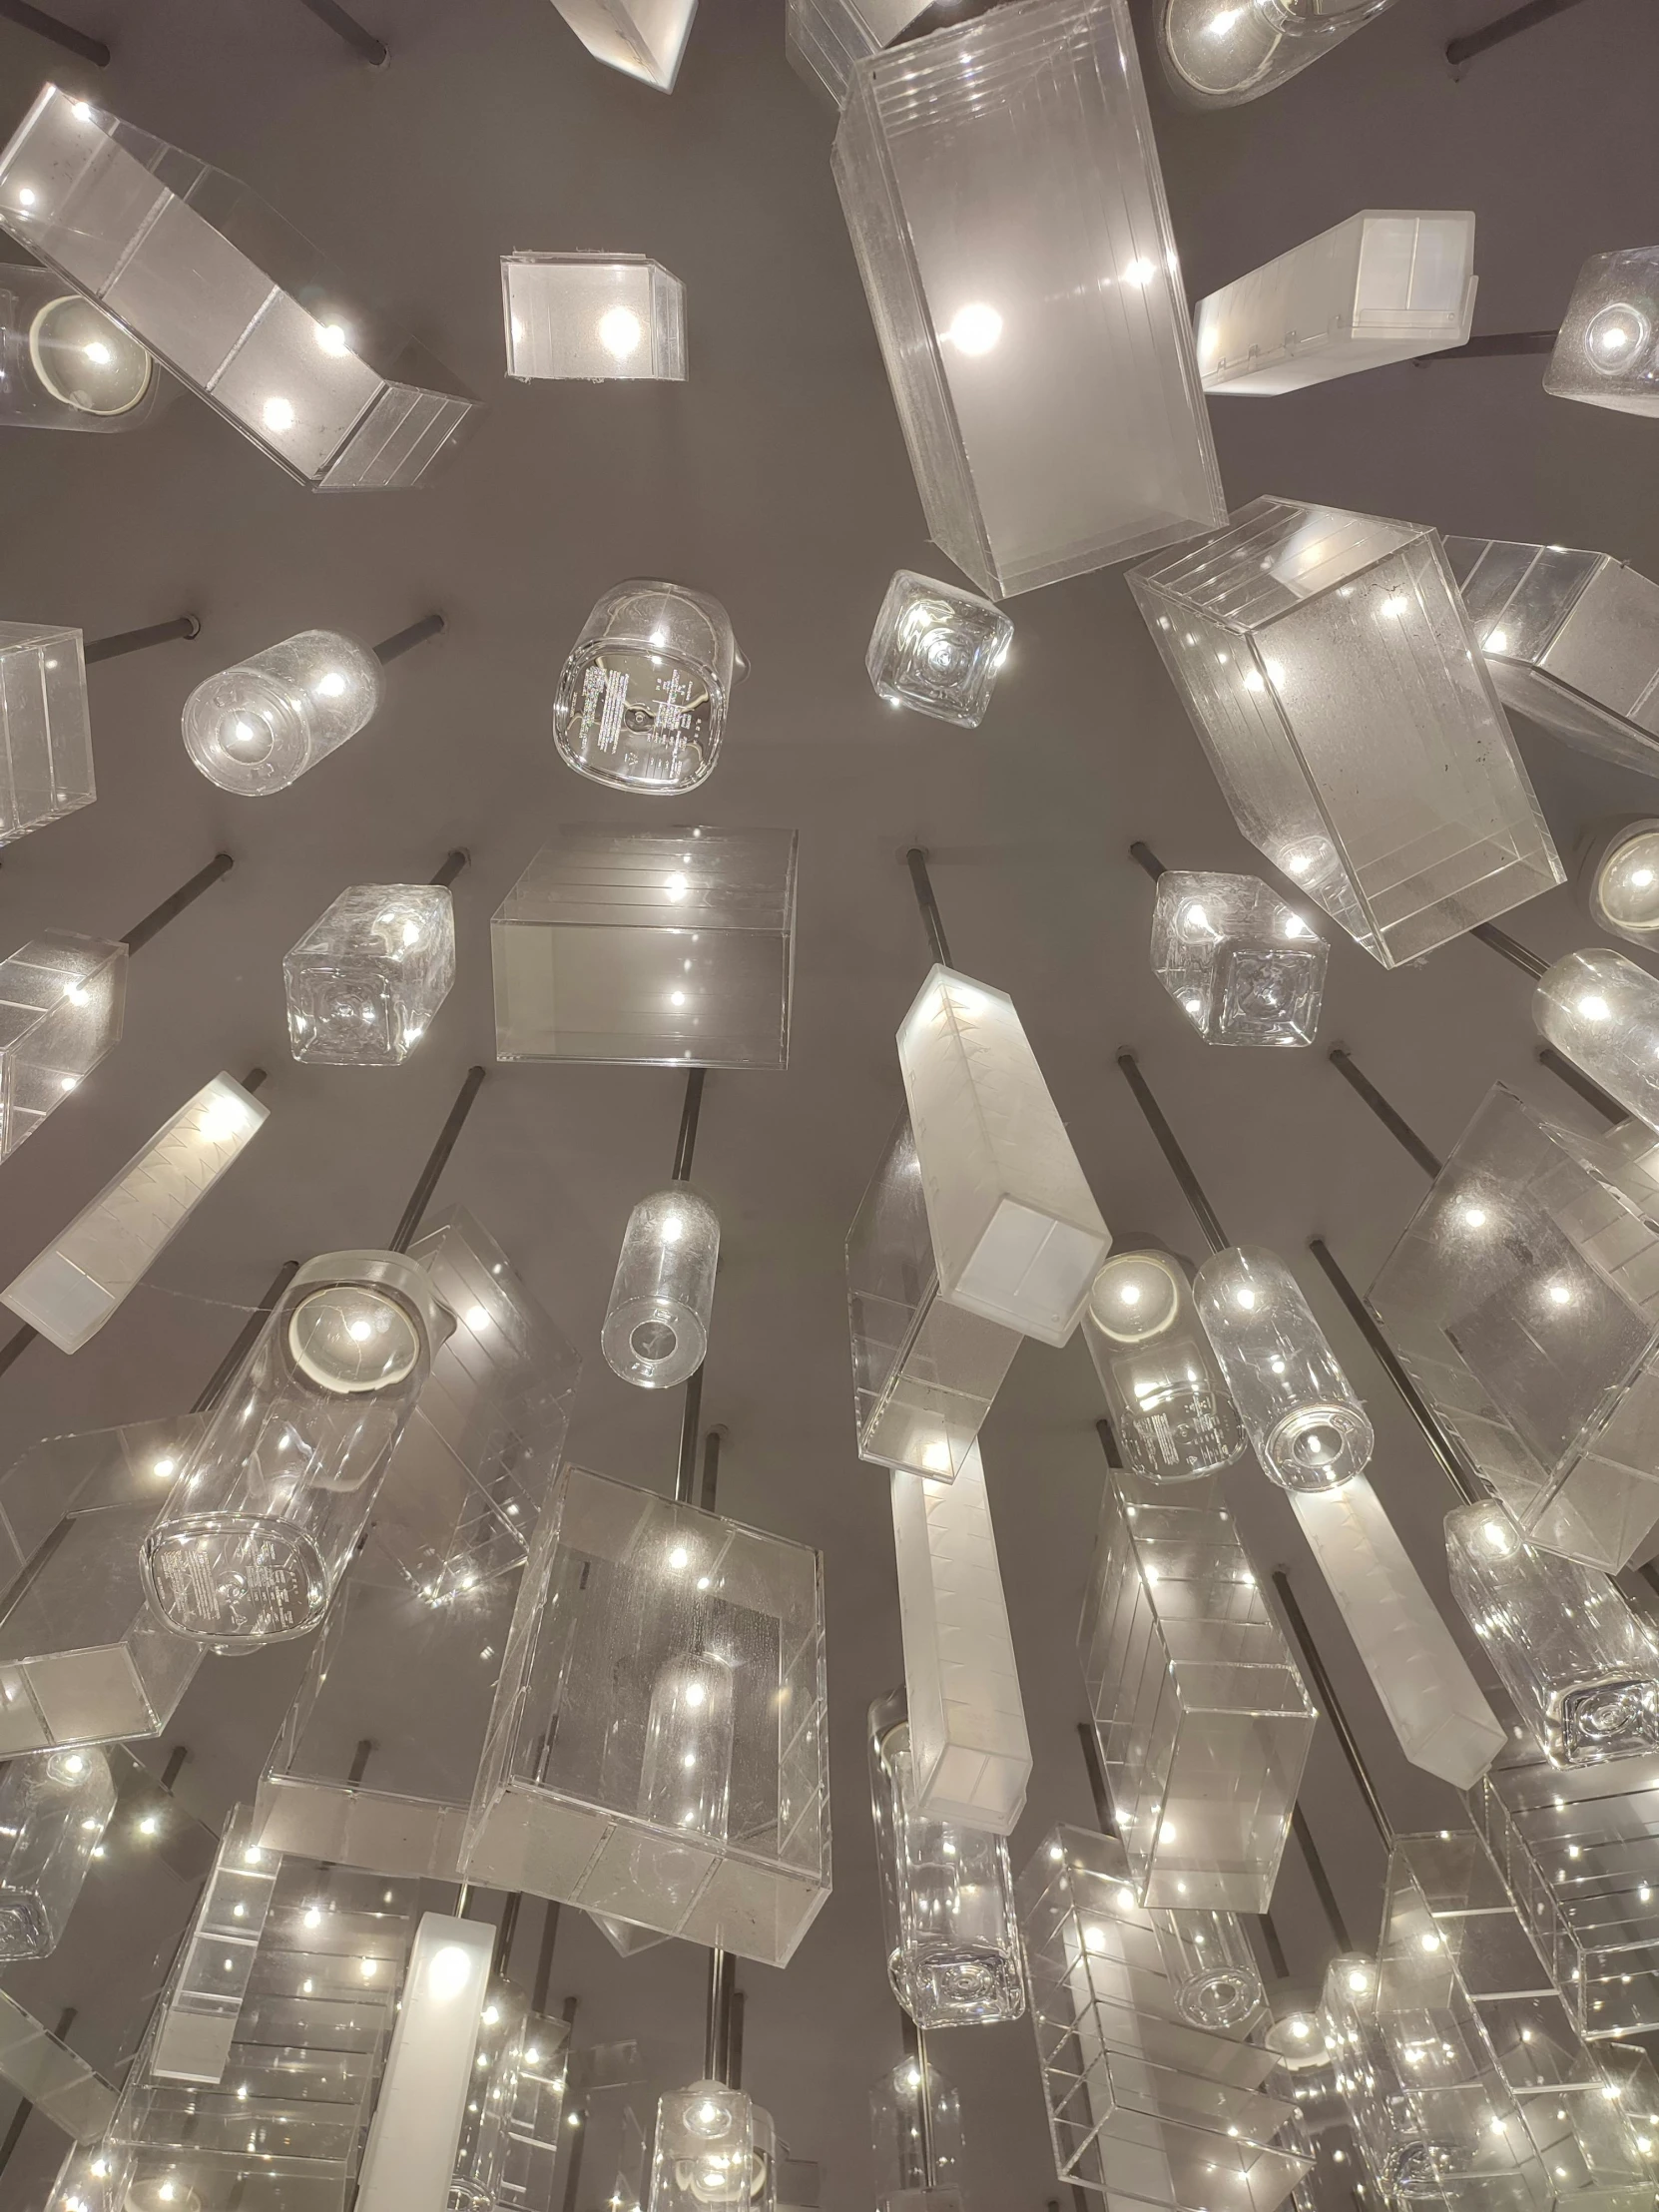 the ceiling features a series of glass balls and disco lights